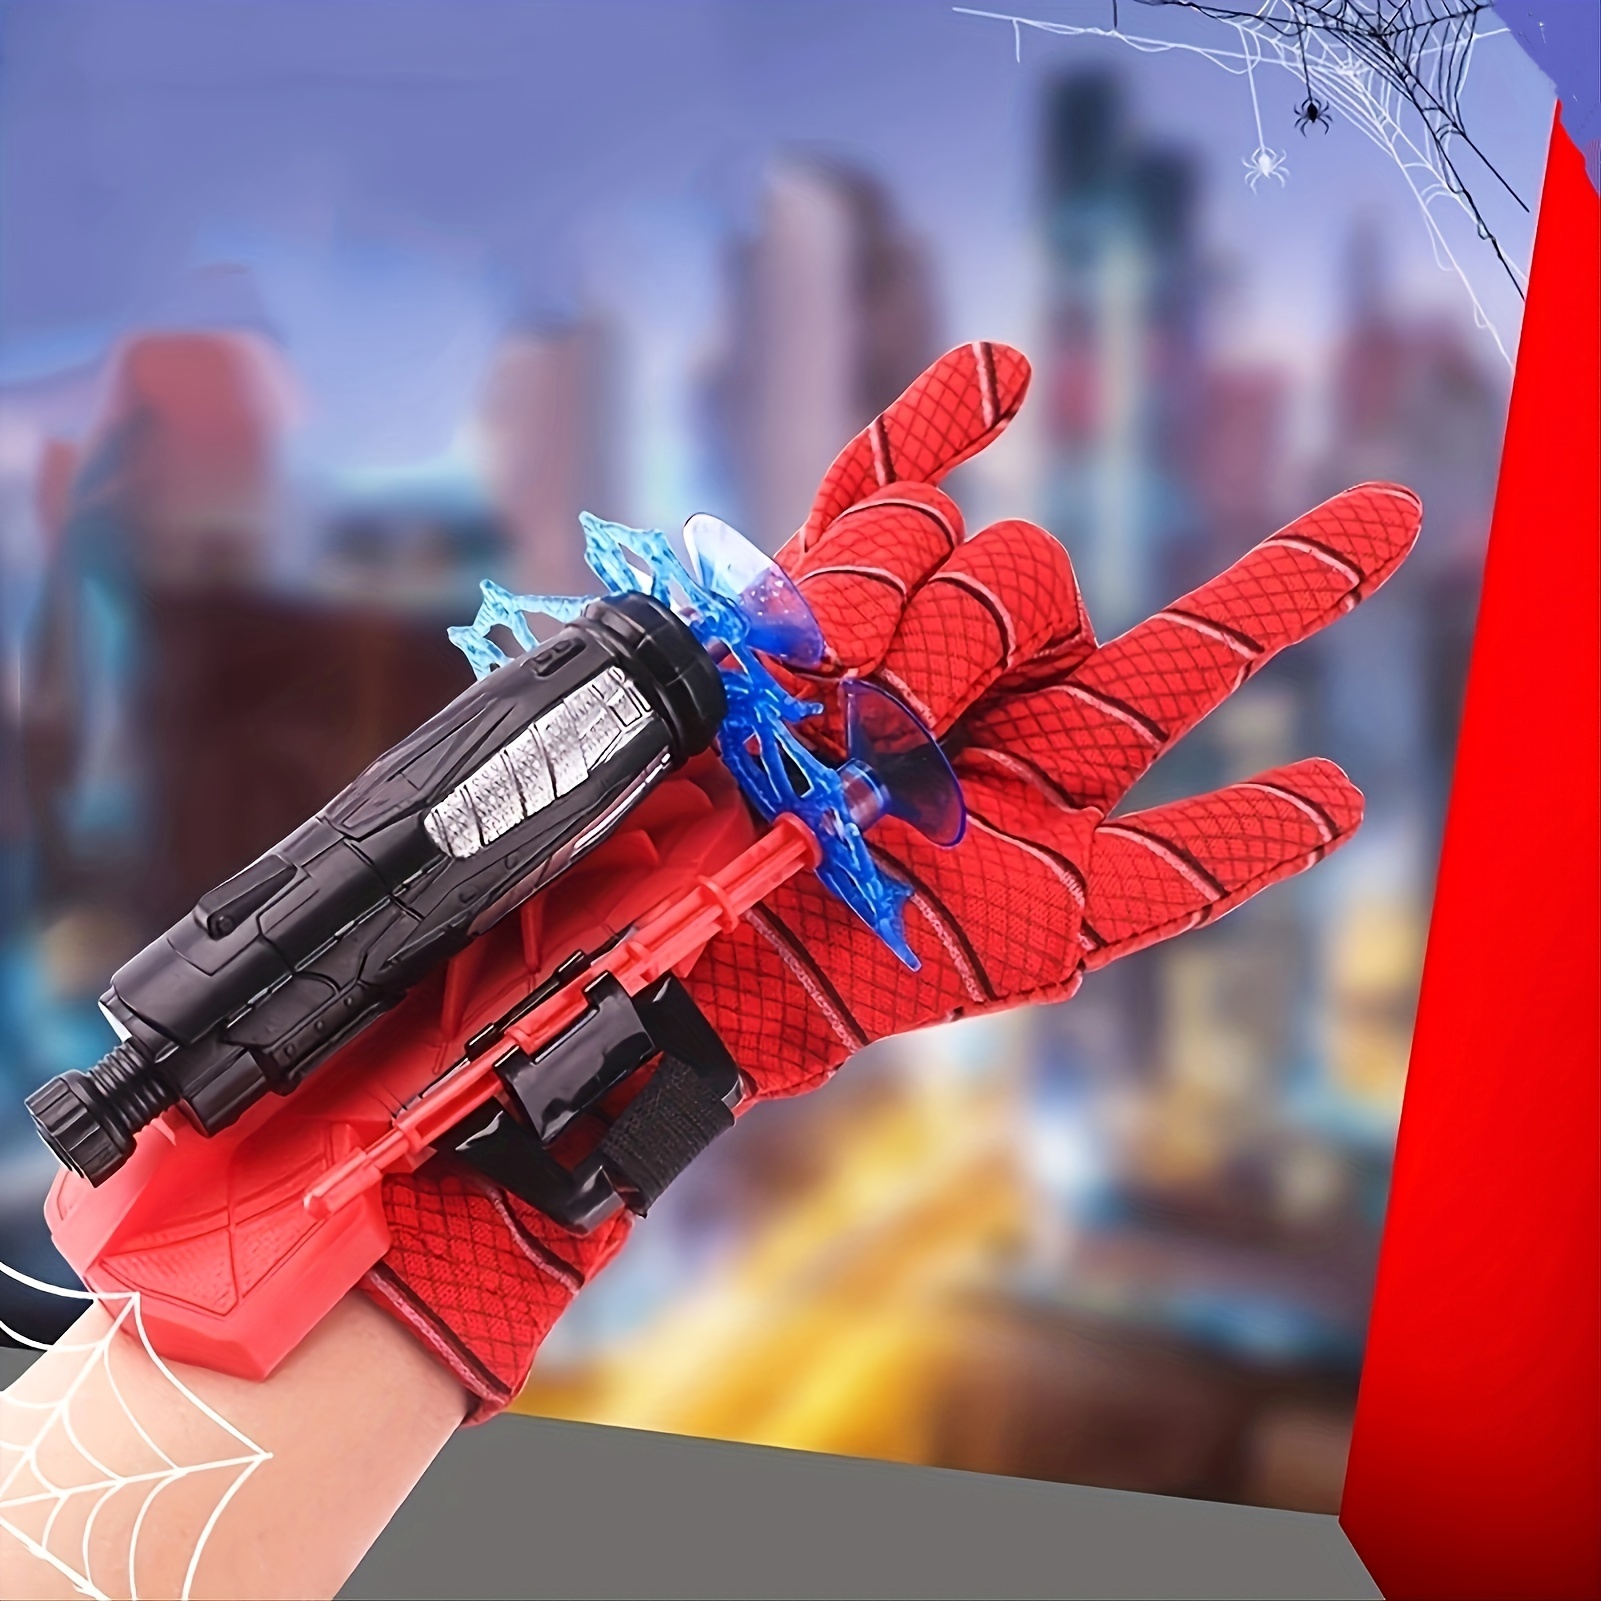 

Spider Web Shooters Toy For Fans, Hero Launcher Wrist Toy Set, Cosplay Launcher Bracers Accessories, Sticky Wall Soft Bomb, Funny Educational Toys